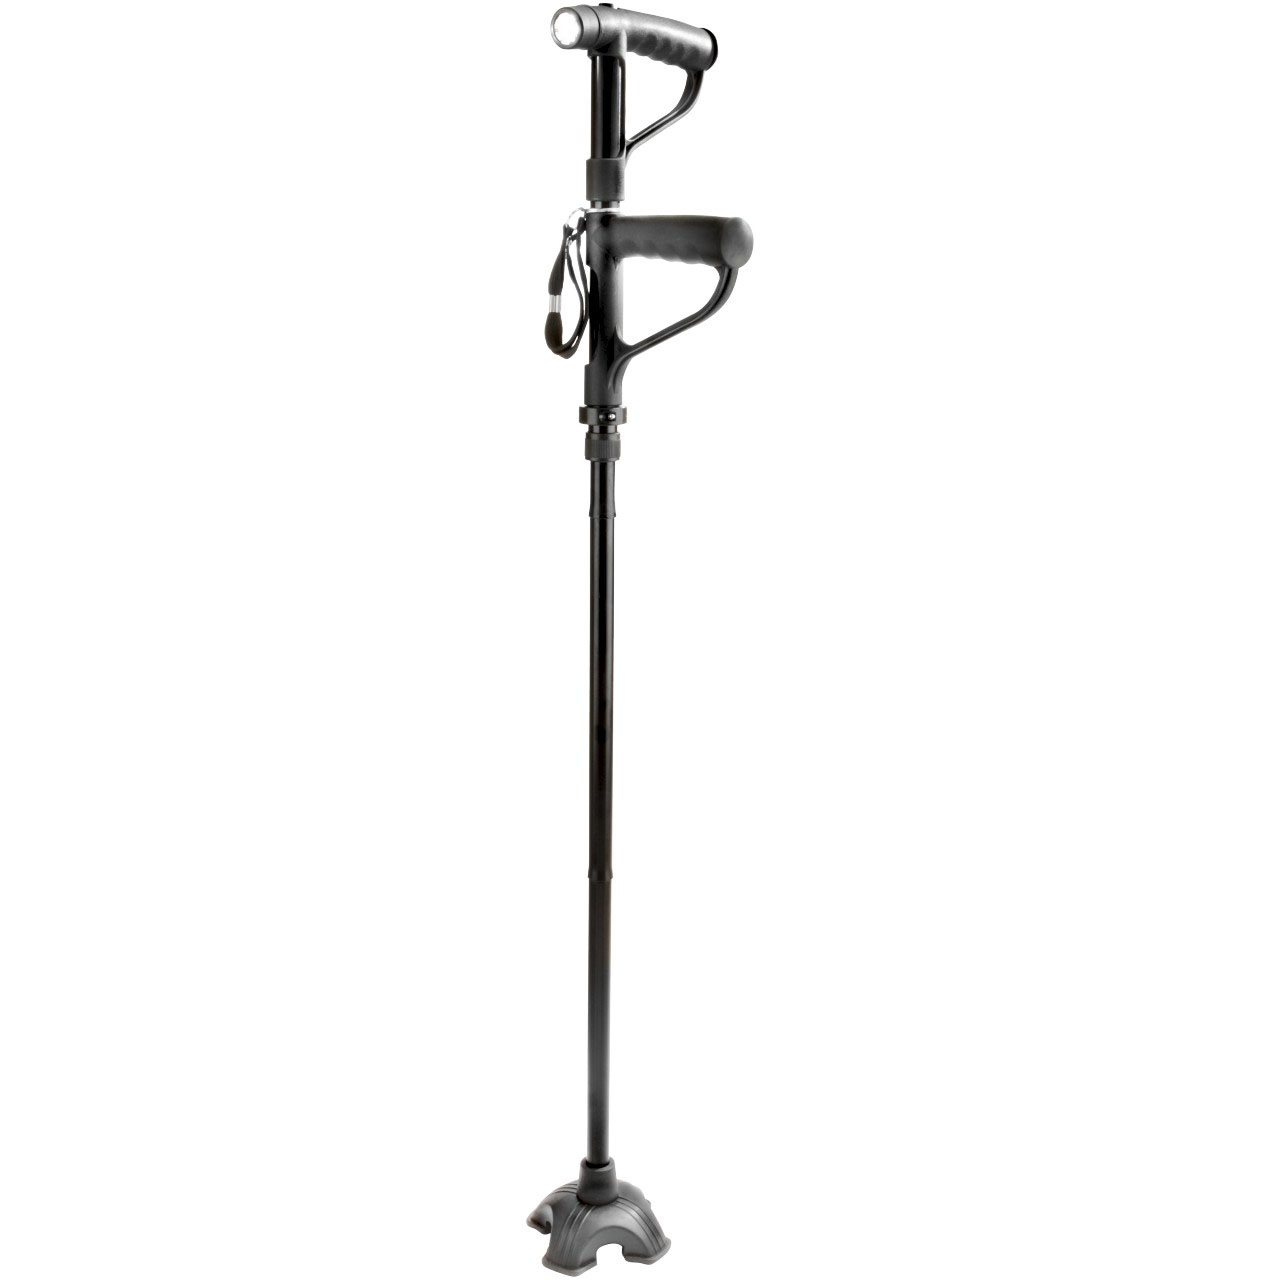 Get Up and Go Walking Stick Cane